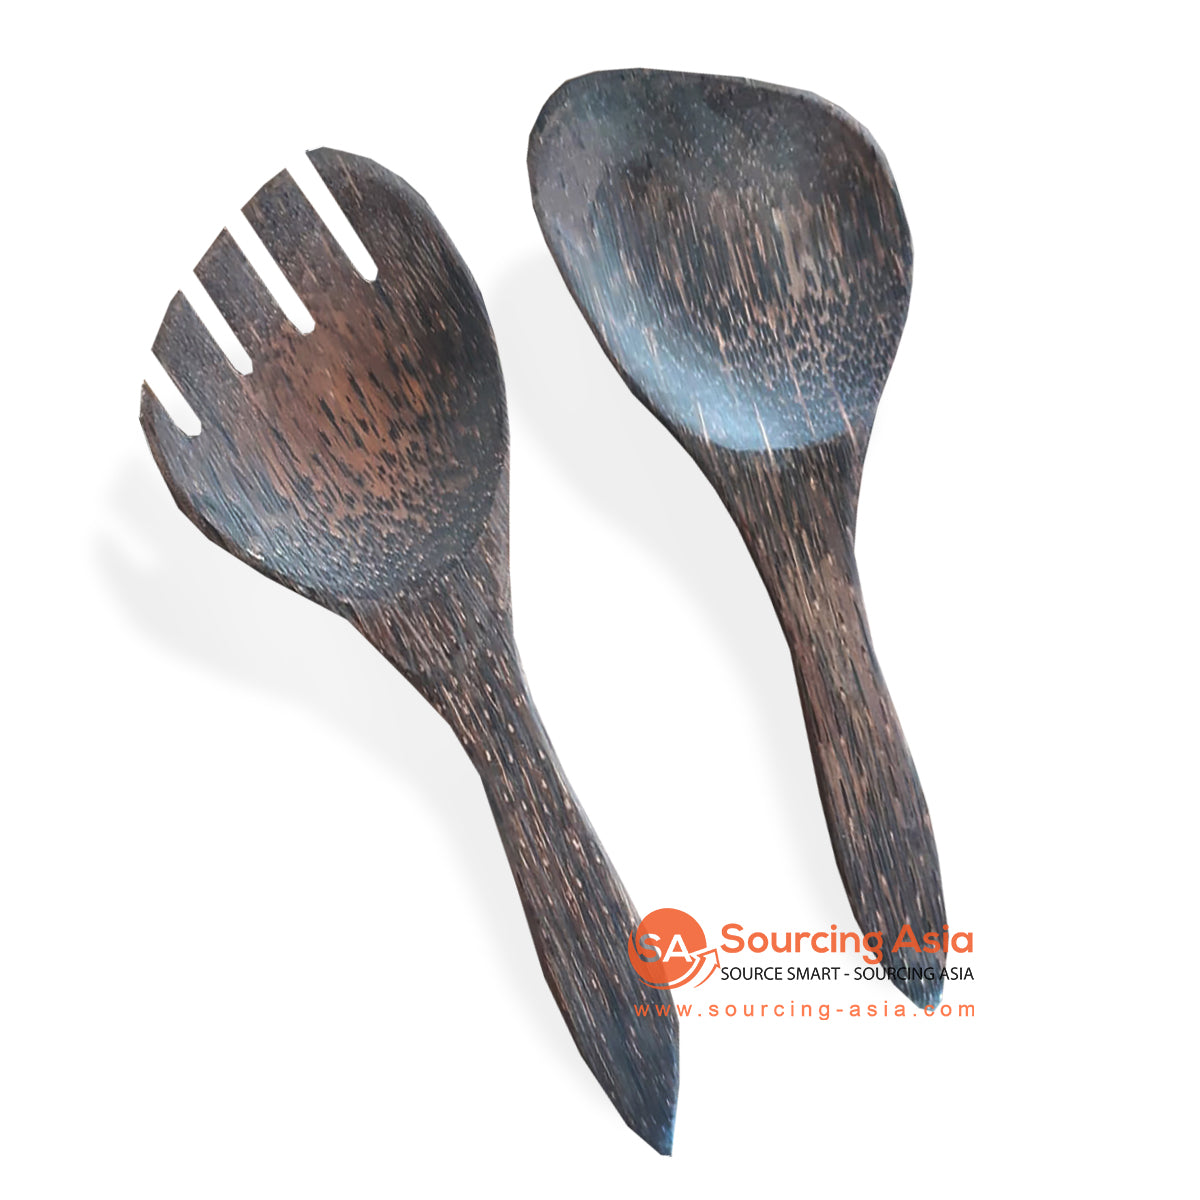 CNT006 SET OF PALM WOOD SPOON AND FORK